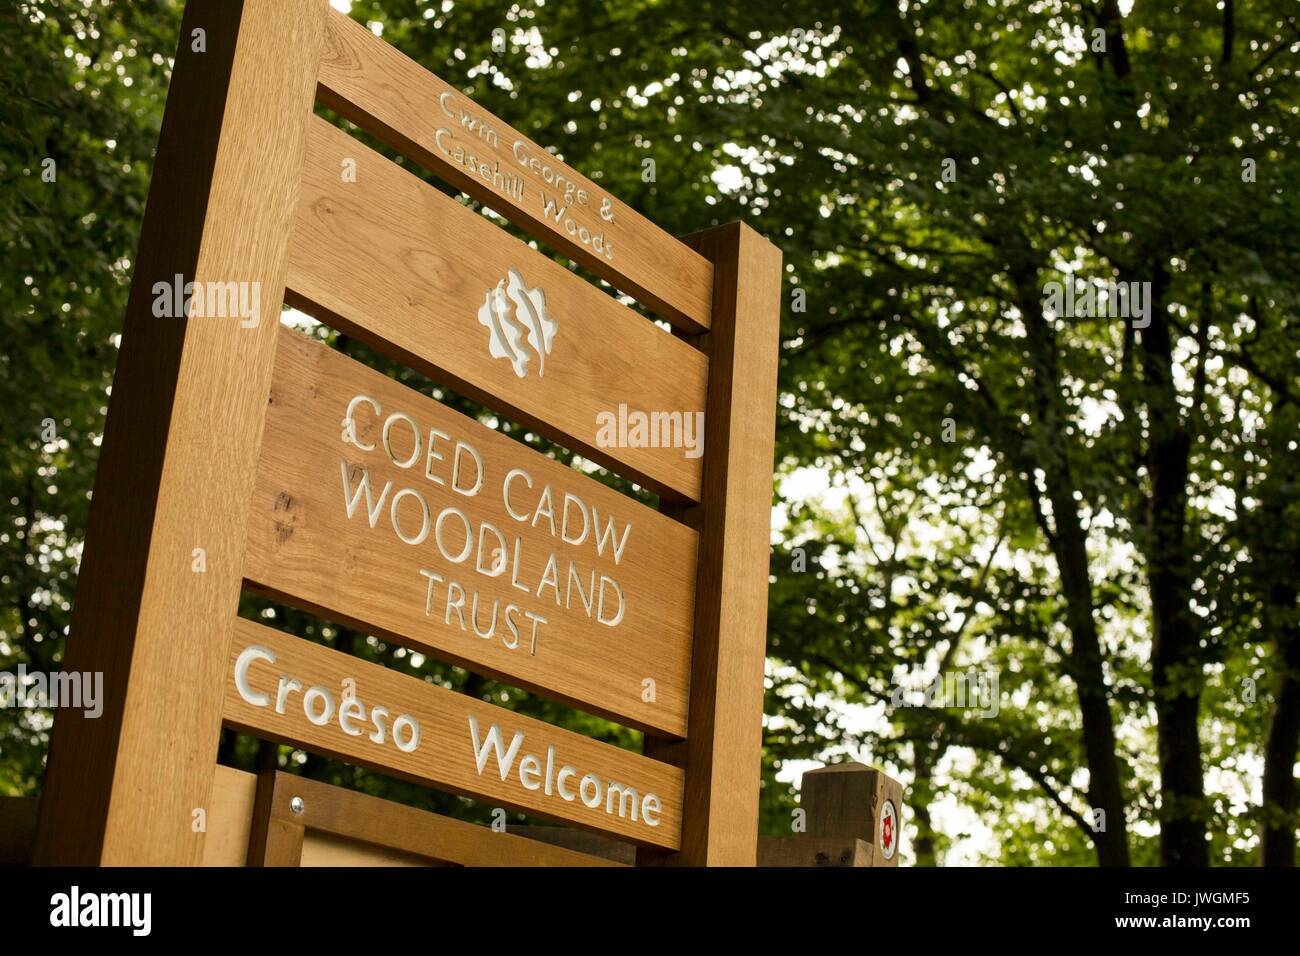 Coed Cadw Woodland Trust welcome sign at Cwm George & Casehill Woods near Cardiff, Vale of Glamorgan, Wales, UK. Stock Photo